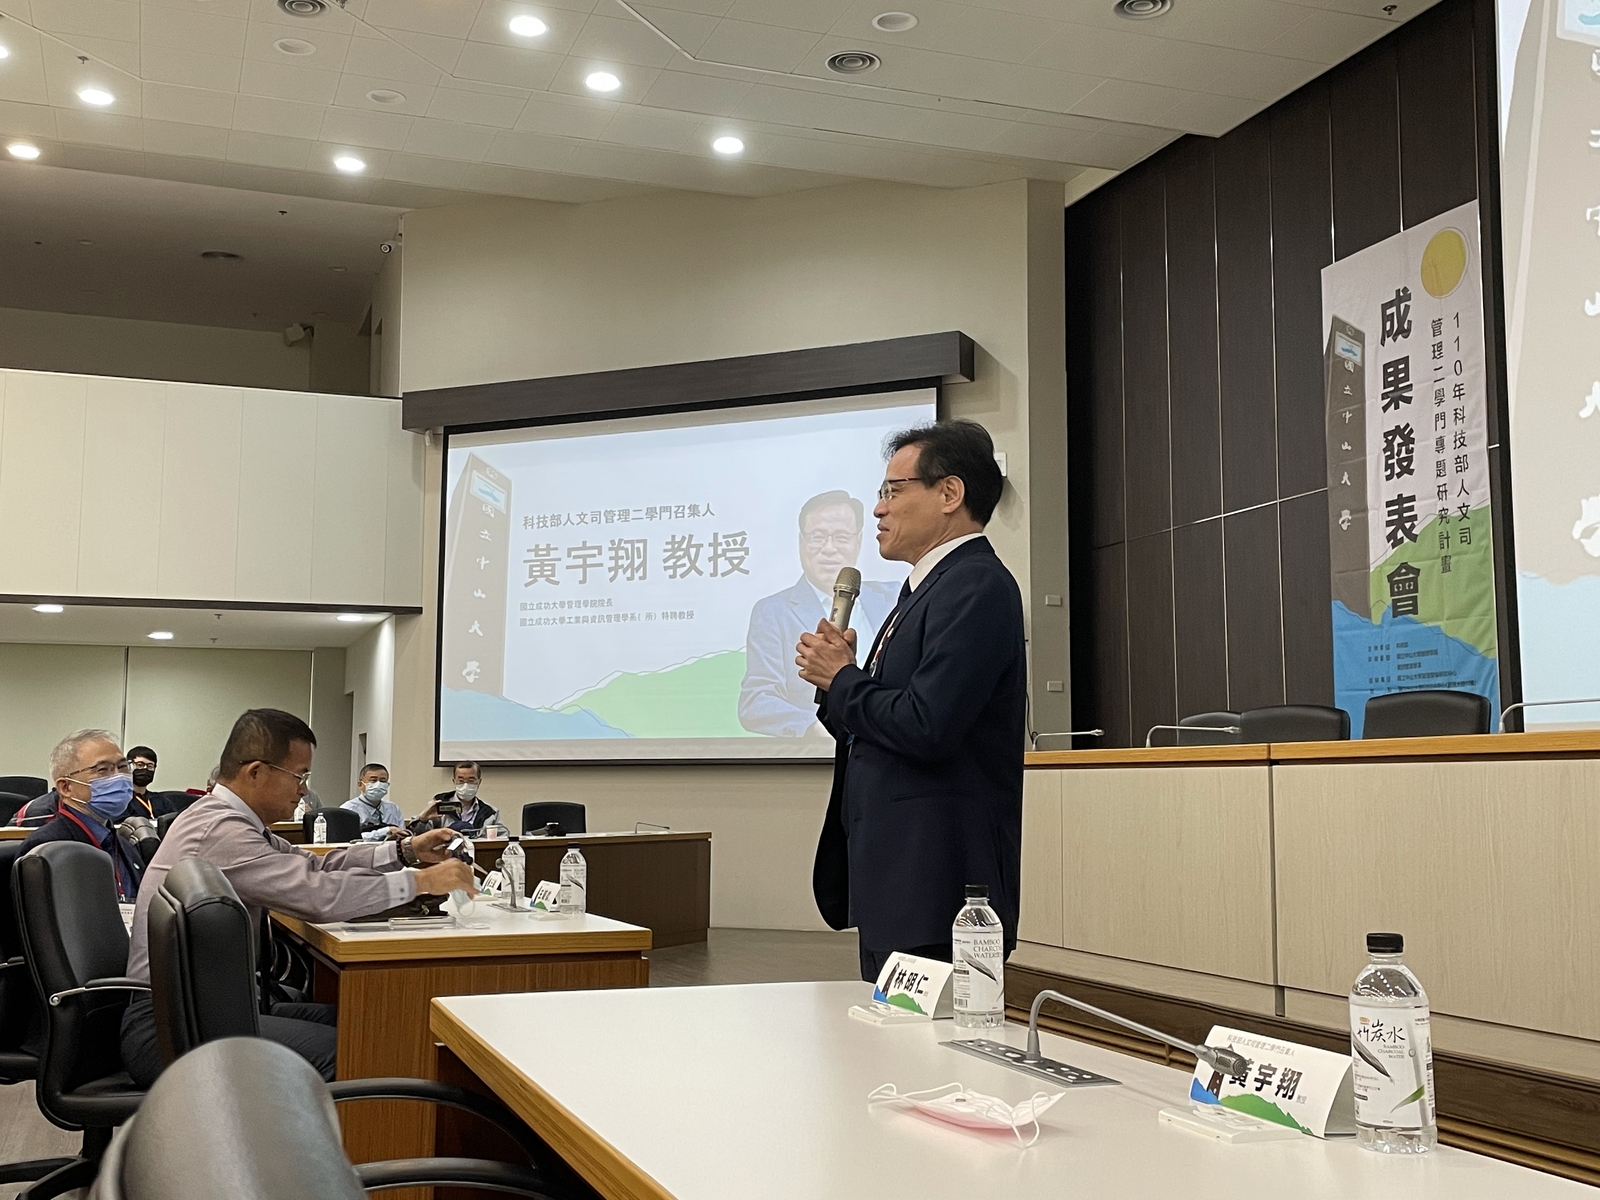 Professor Yeu-Shiang Huang, the convener of the Management II Division, Department of Humanities and Social Sciences, Ministry of Science and Technology, delivered an opening speech.